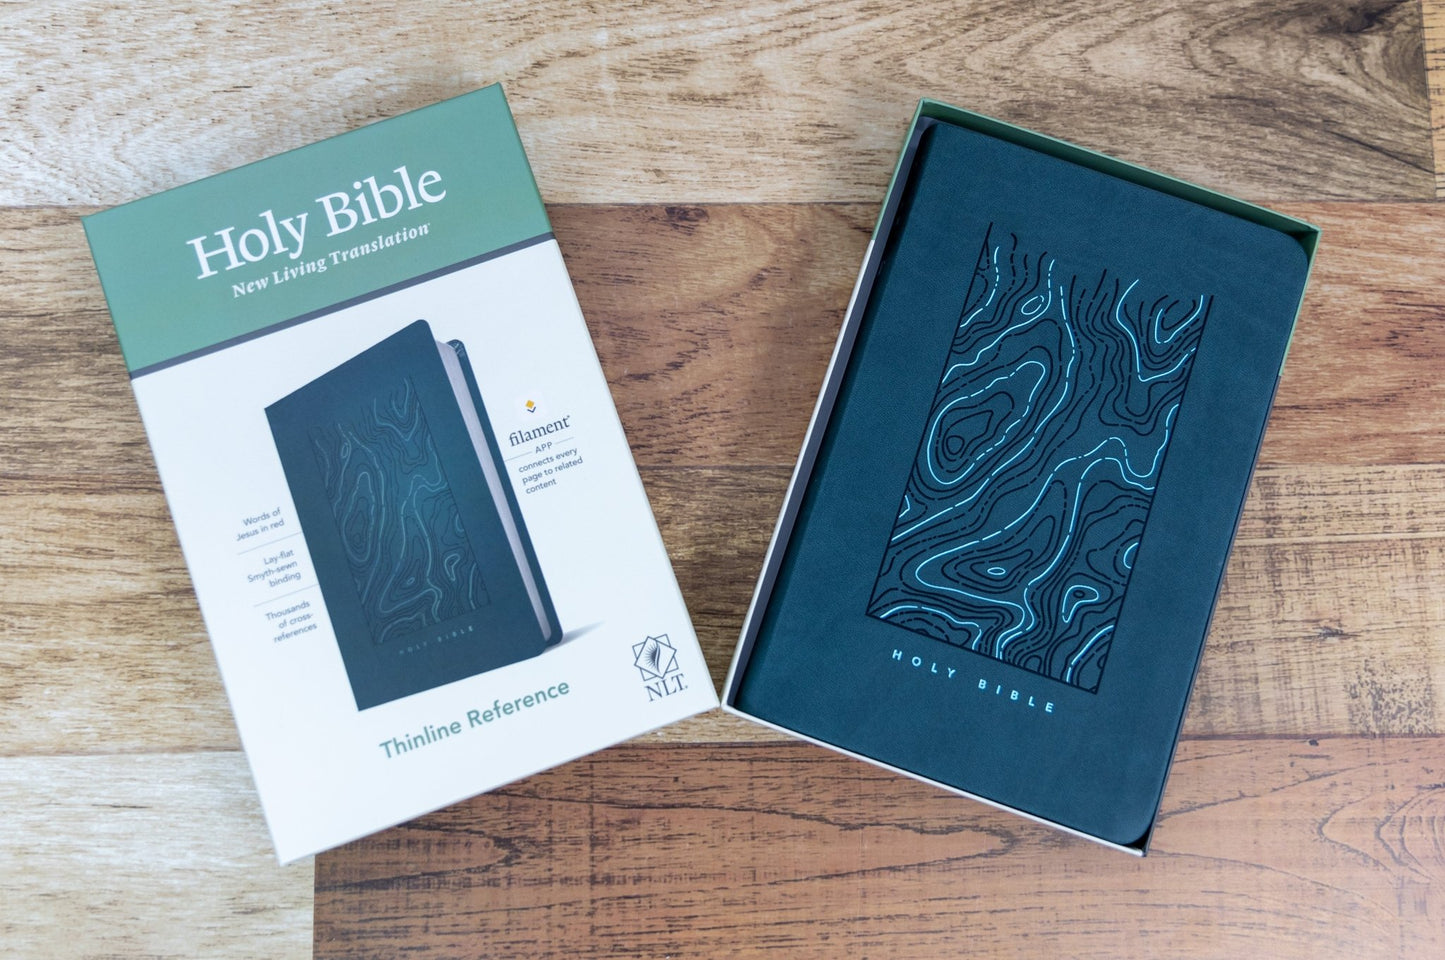 NLT Thinline Reference Bible, Filament-Enabled Edition - Sunday